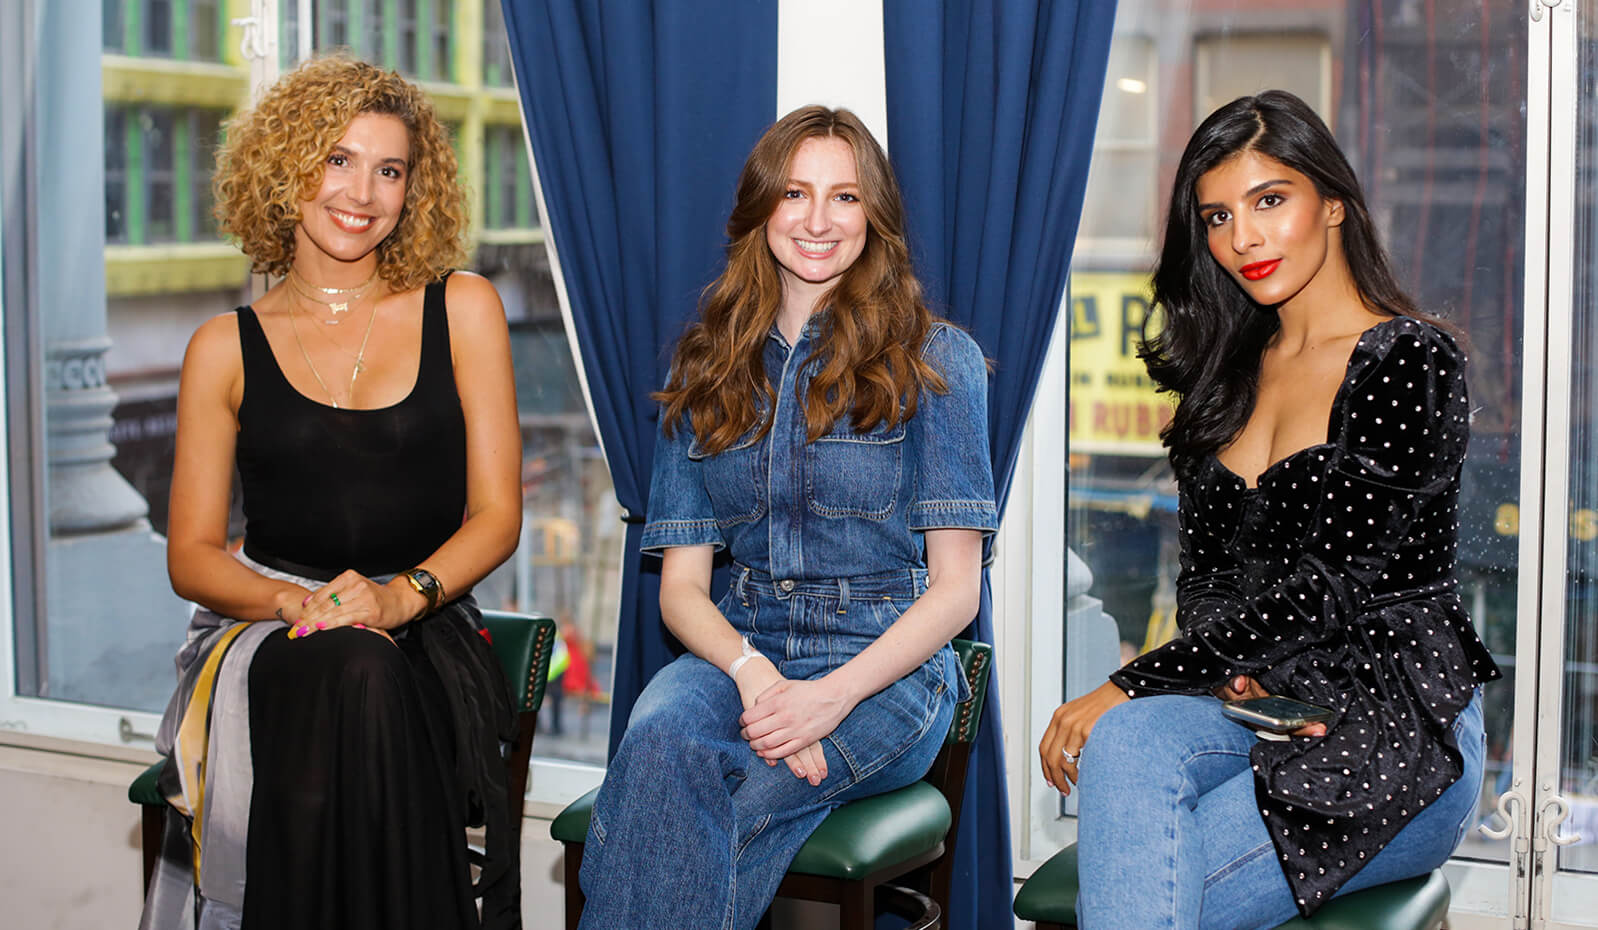 Evie Phillips, Norah Murphy and Rohma Siddiqui, Panelists for Blogger and the Brand Womens' 2019